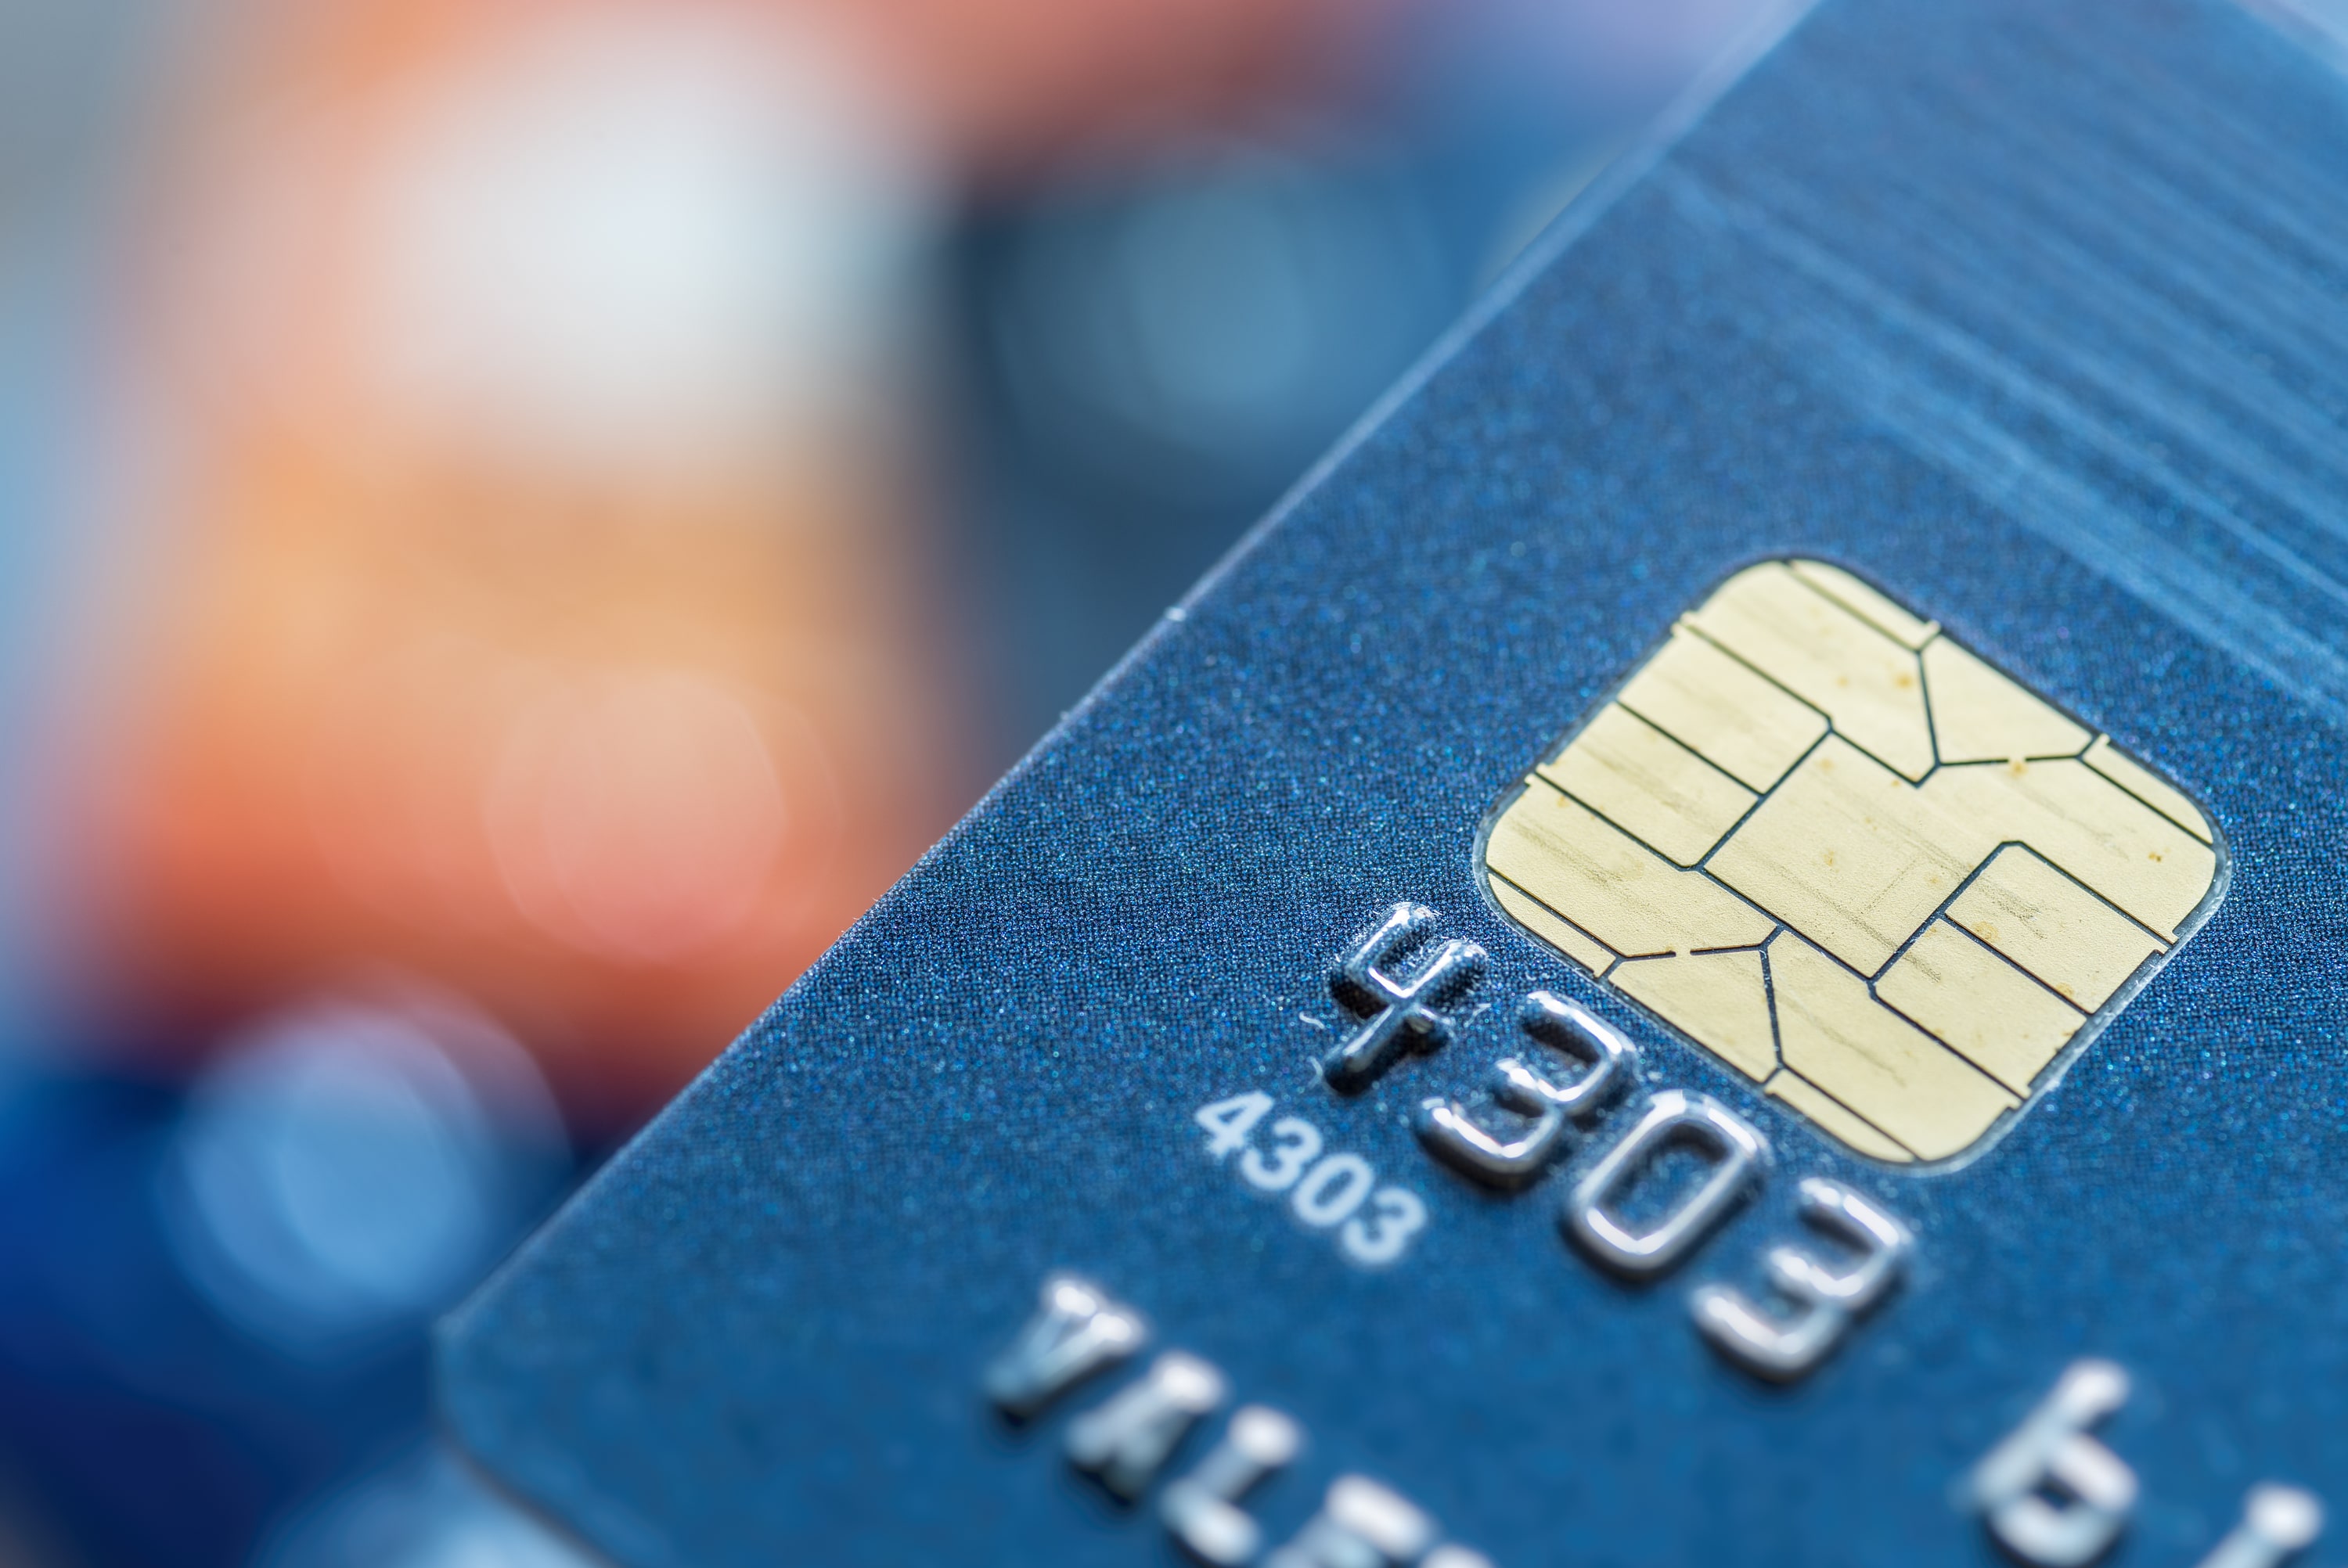 How EMV (Chip) Credit Cards Work - Technology & Security